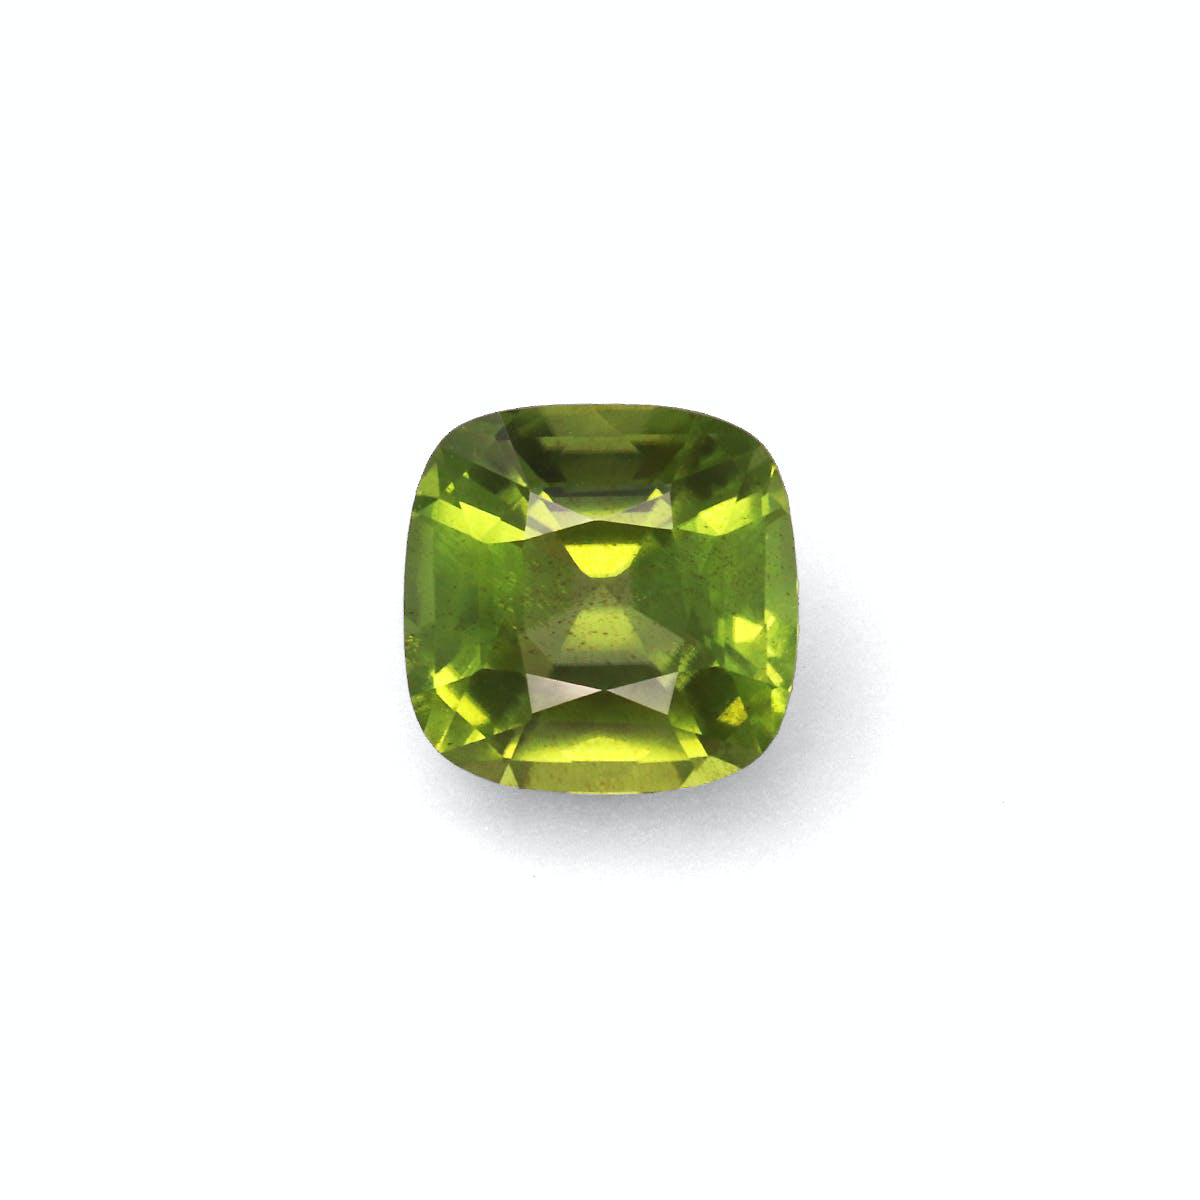 Picture of Pistachio Green Peridot 4.05ct - 9mm (PD0177)